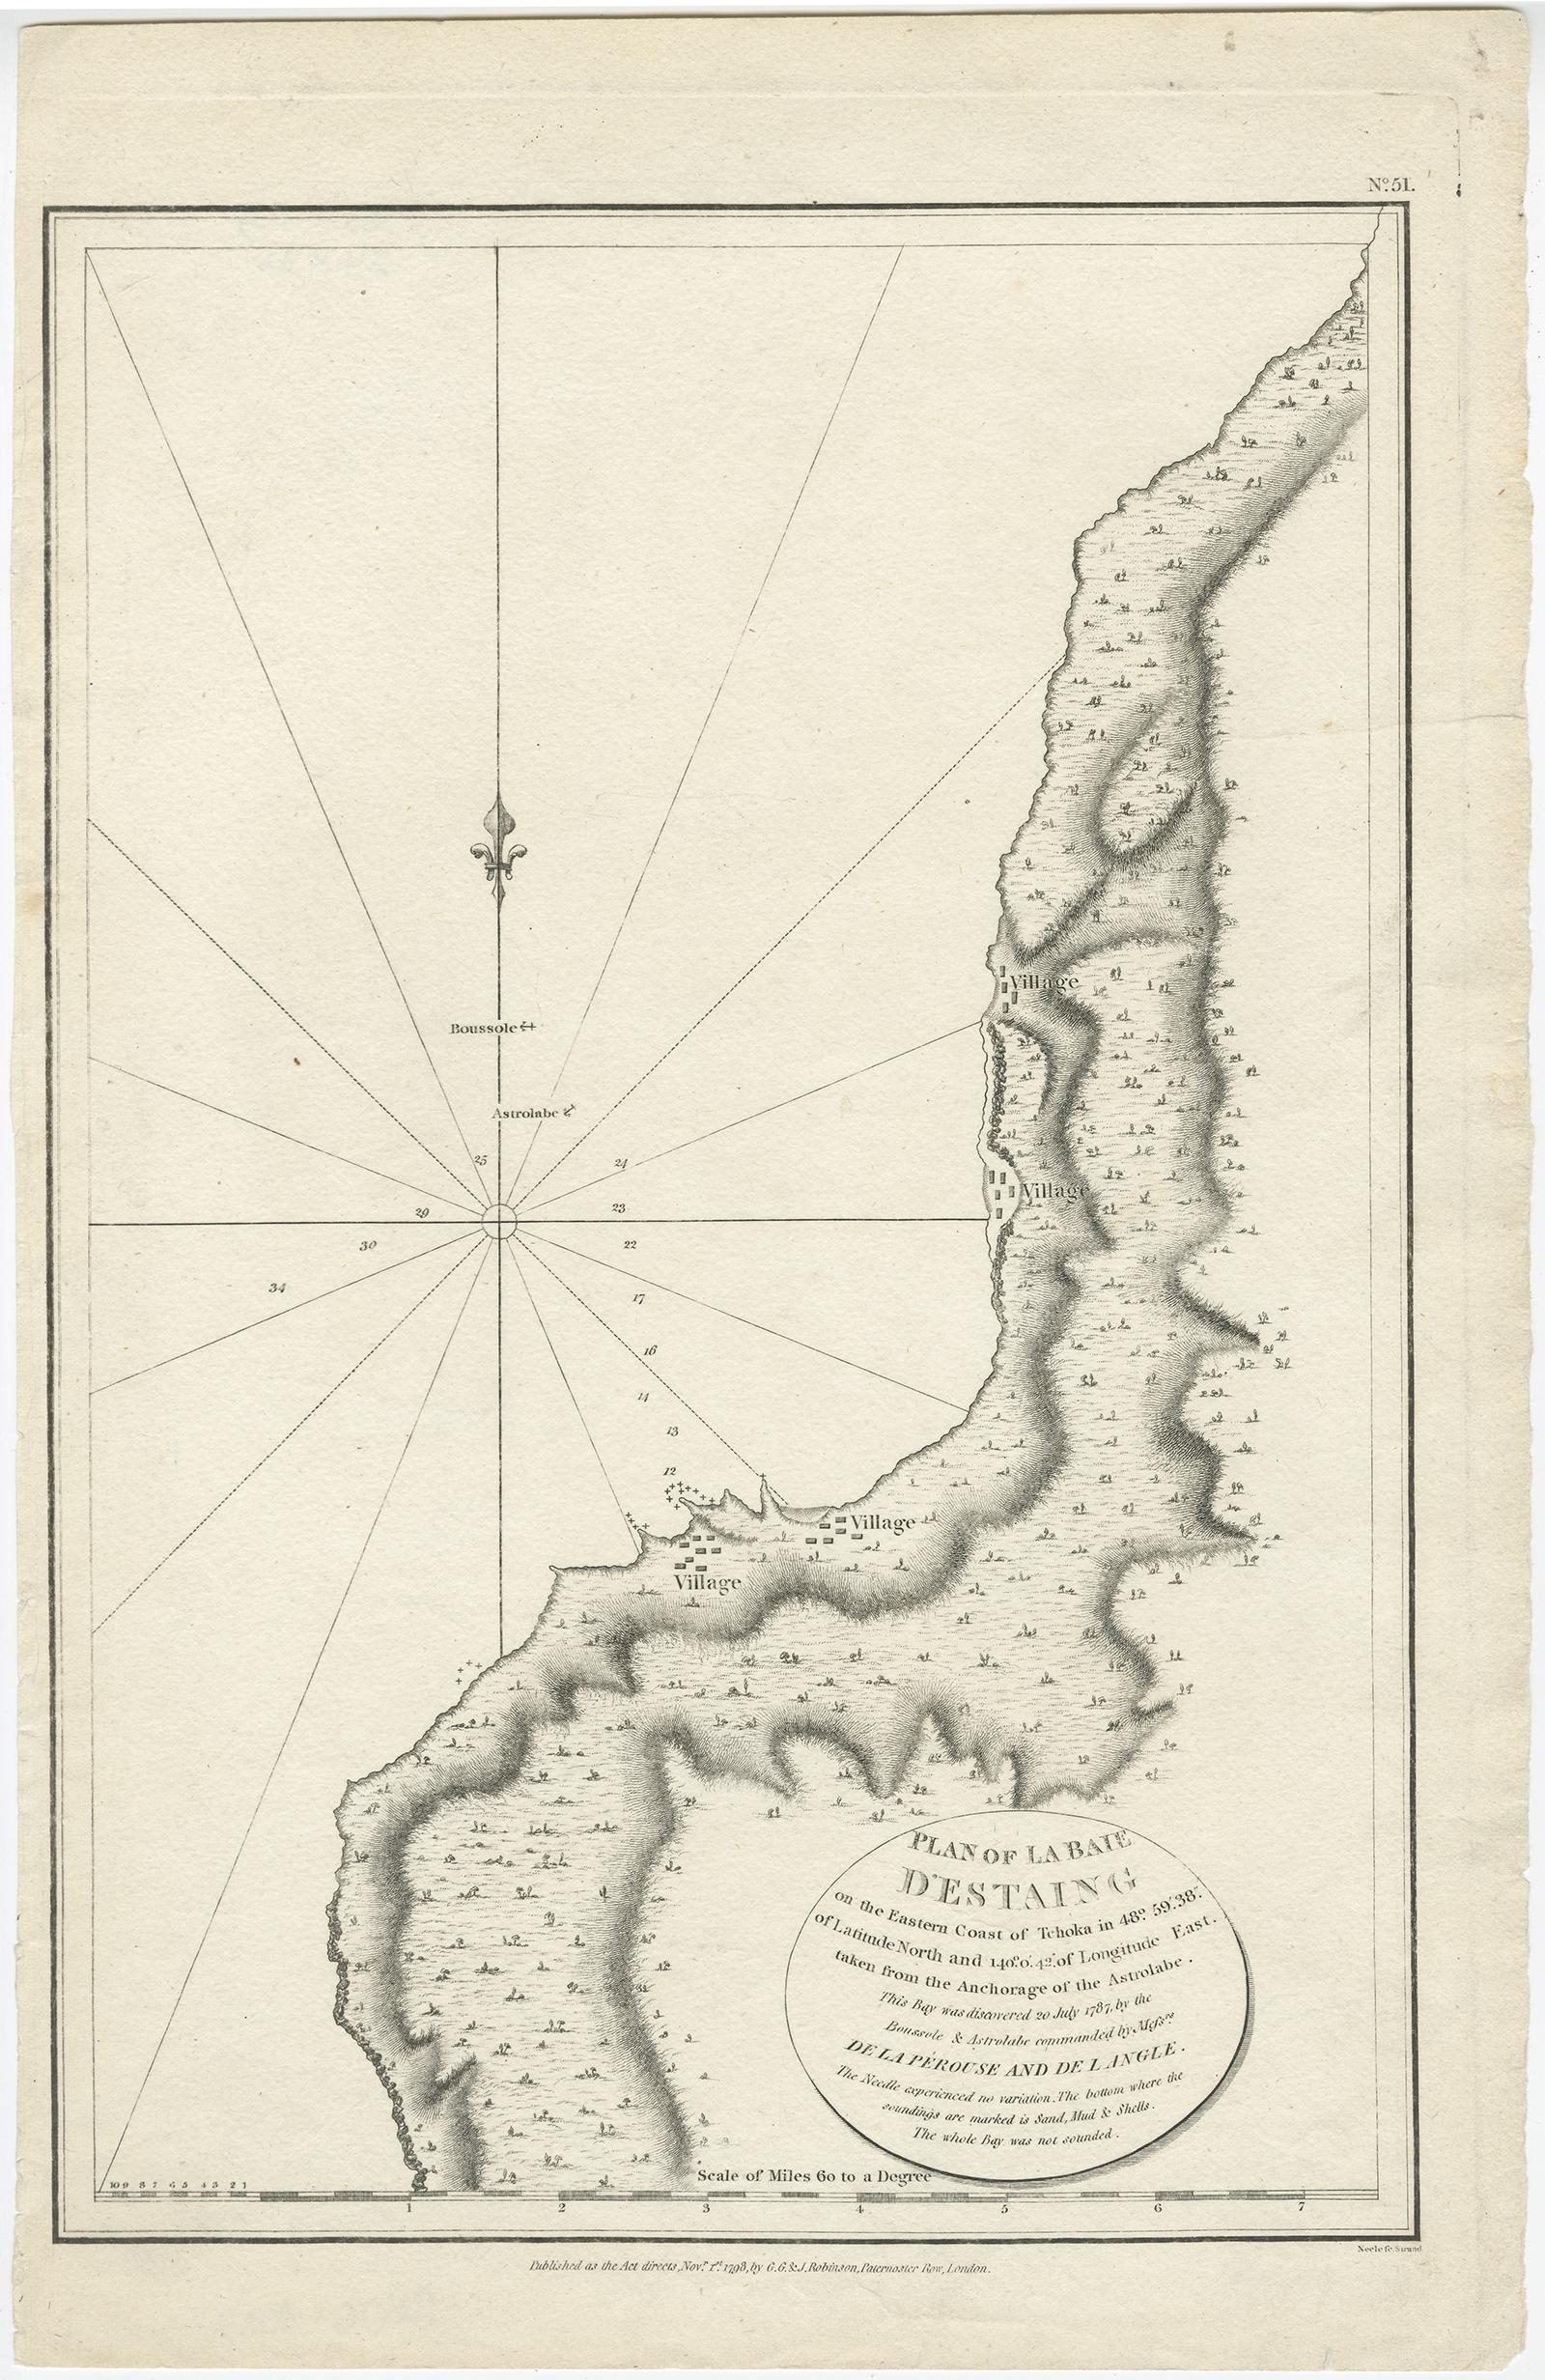 Antique map titled 'Plan of La Baie d'Estaing'. 

This map shows the bay of D'Estaing located on the Russian island of Sakhalin. La Perouse was selected by King Louis XVI to complete Captain James Cook's exploration of the western Pacific.